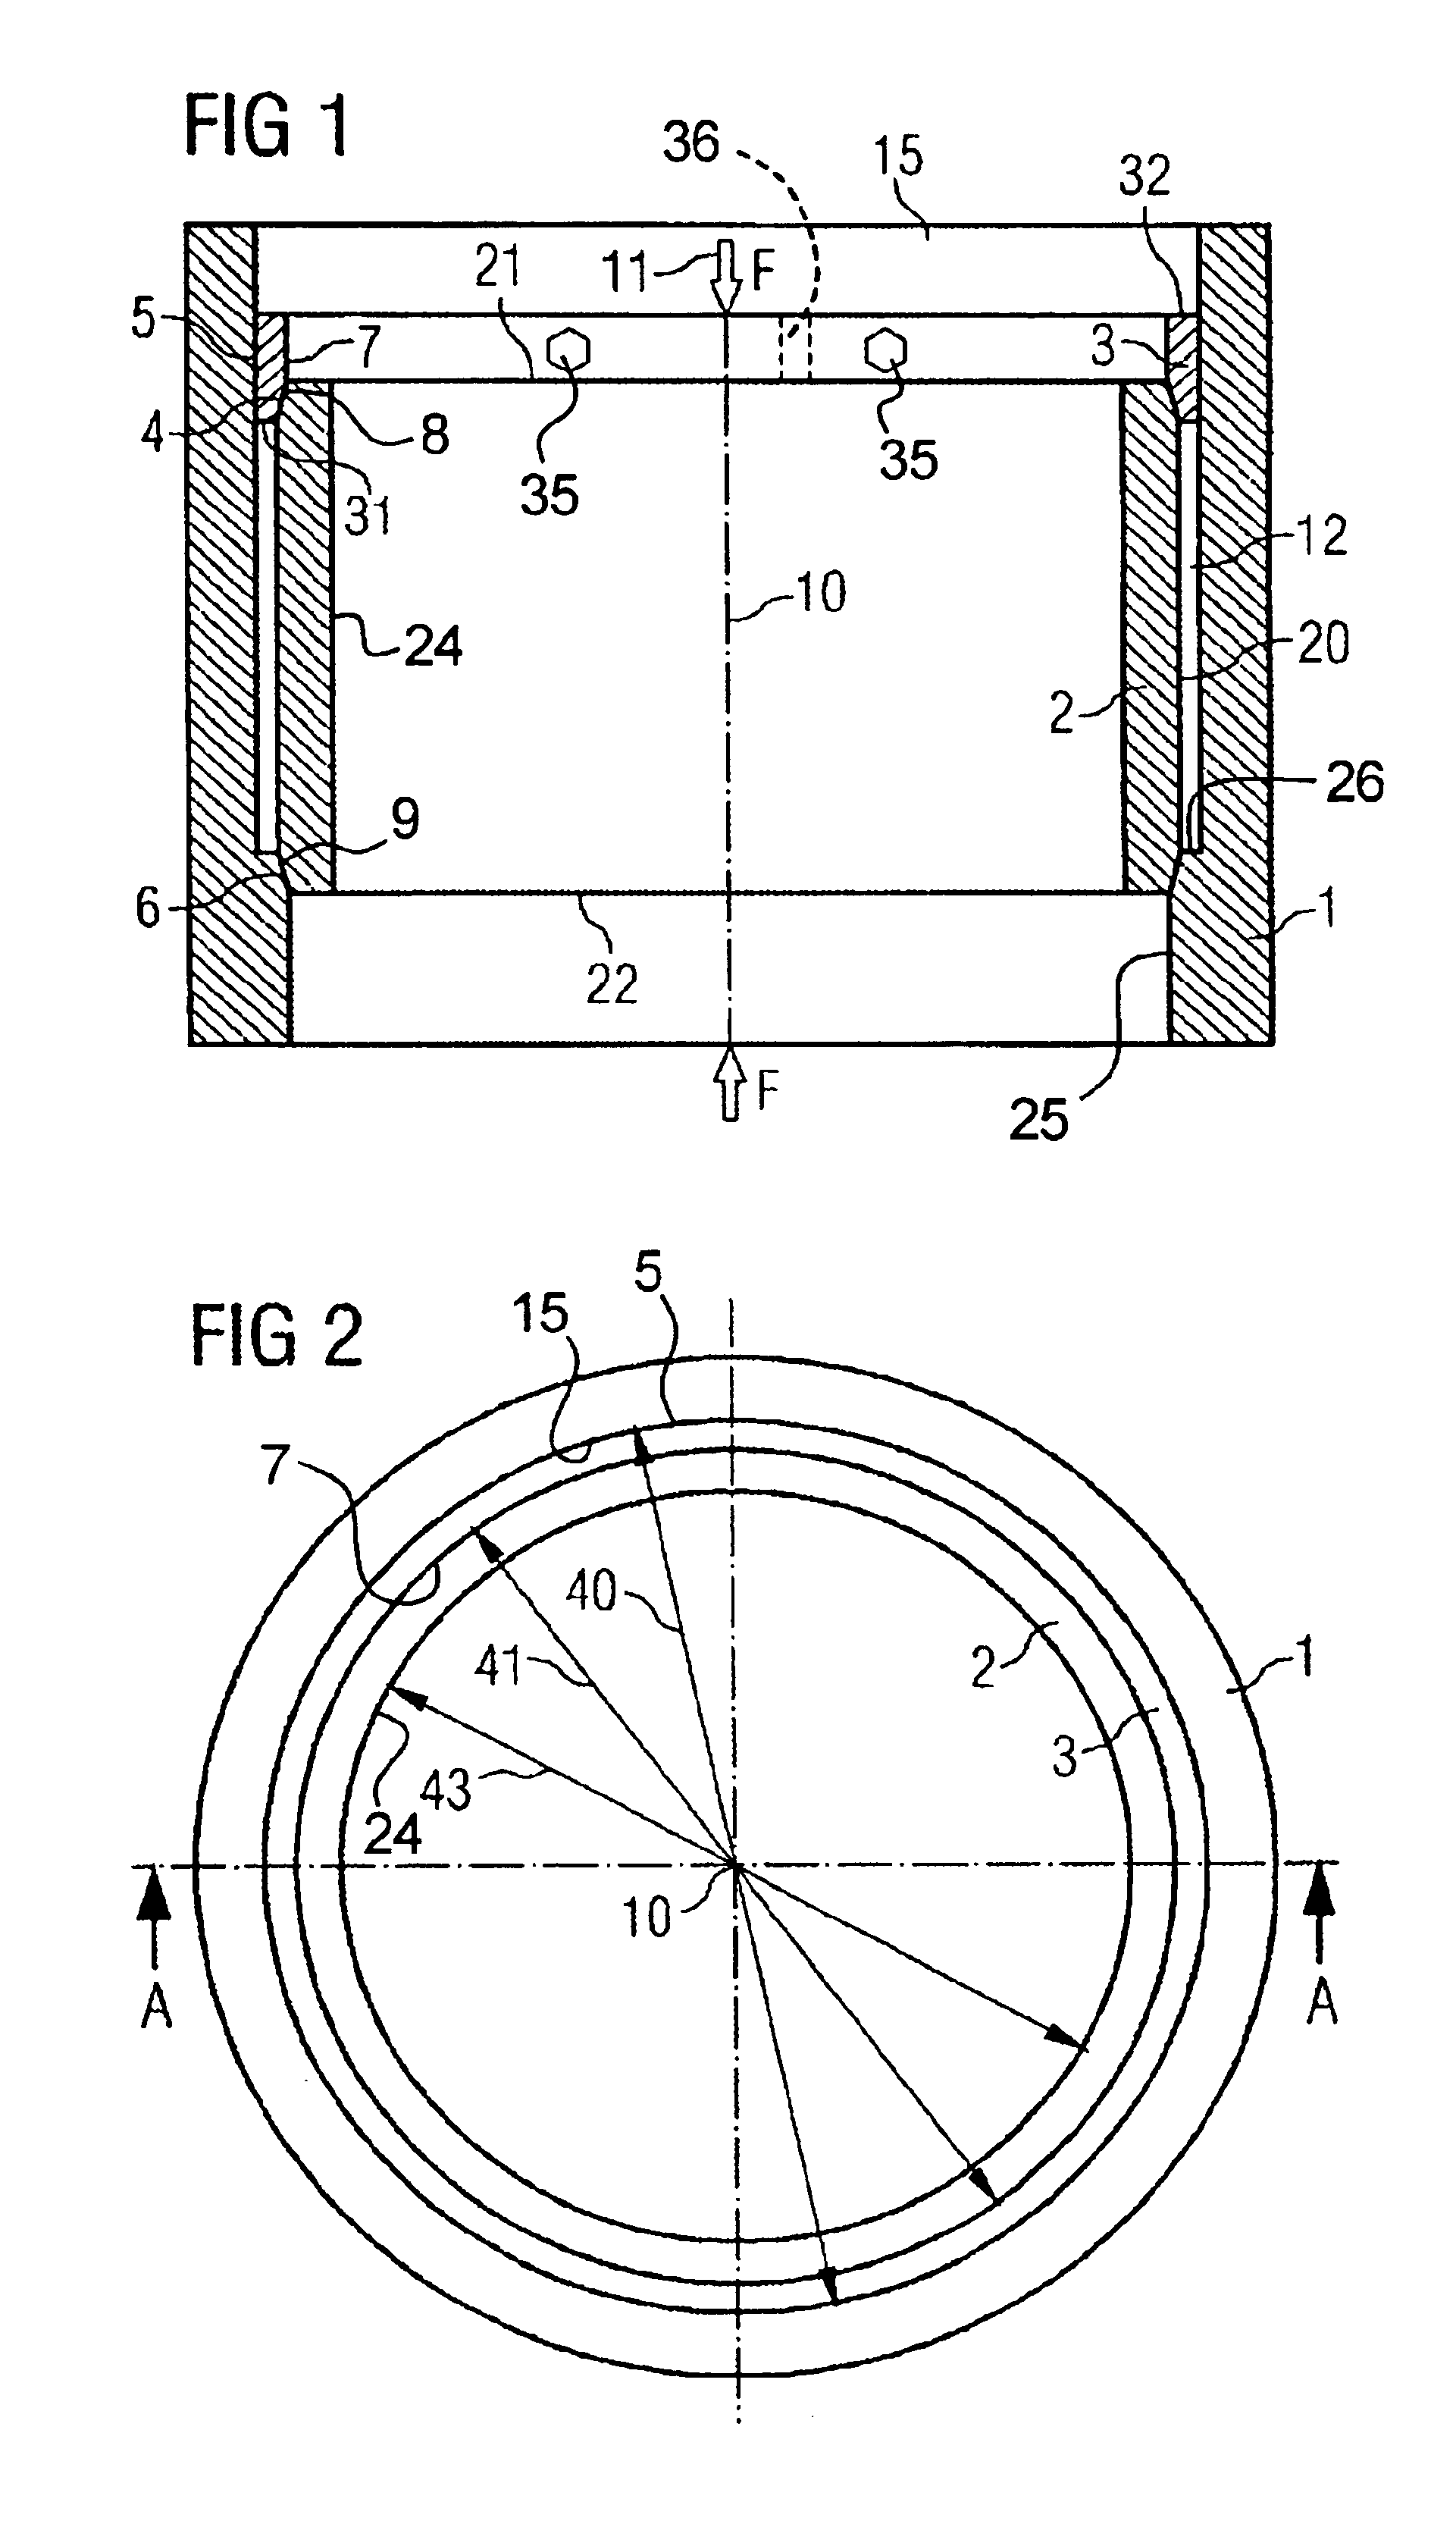 Connection device for positional fixing of a gradient coil assembly of a nuclear magnetic resonance tomograph